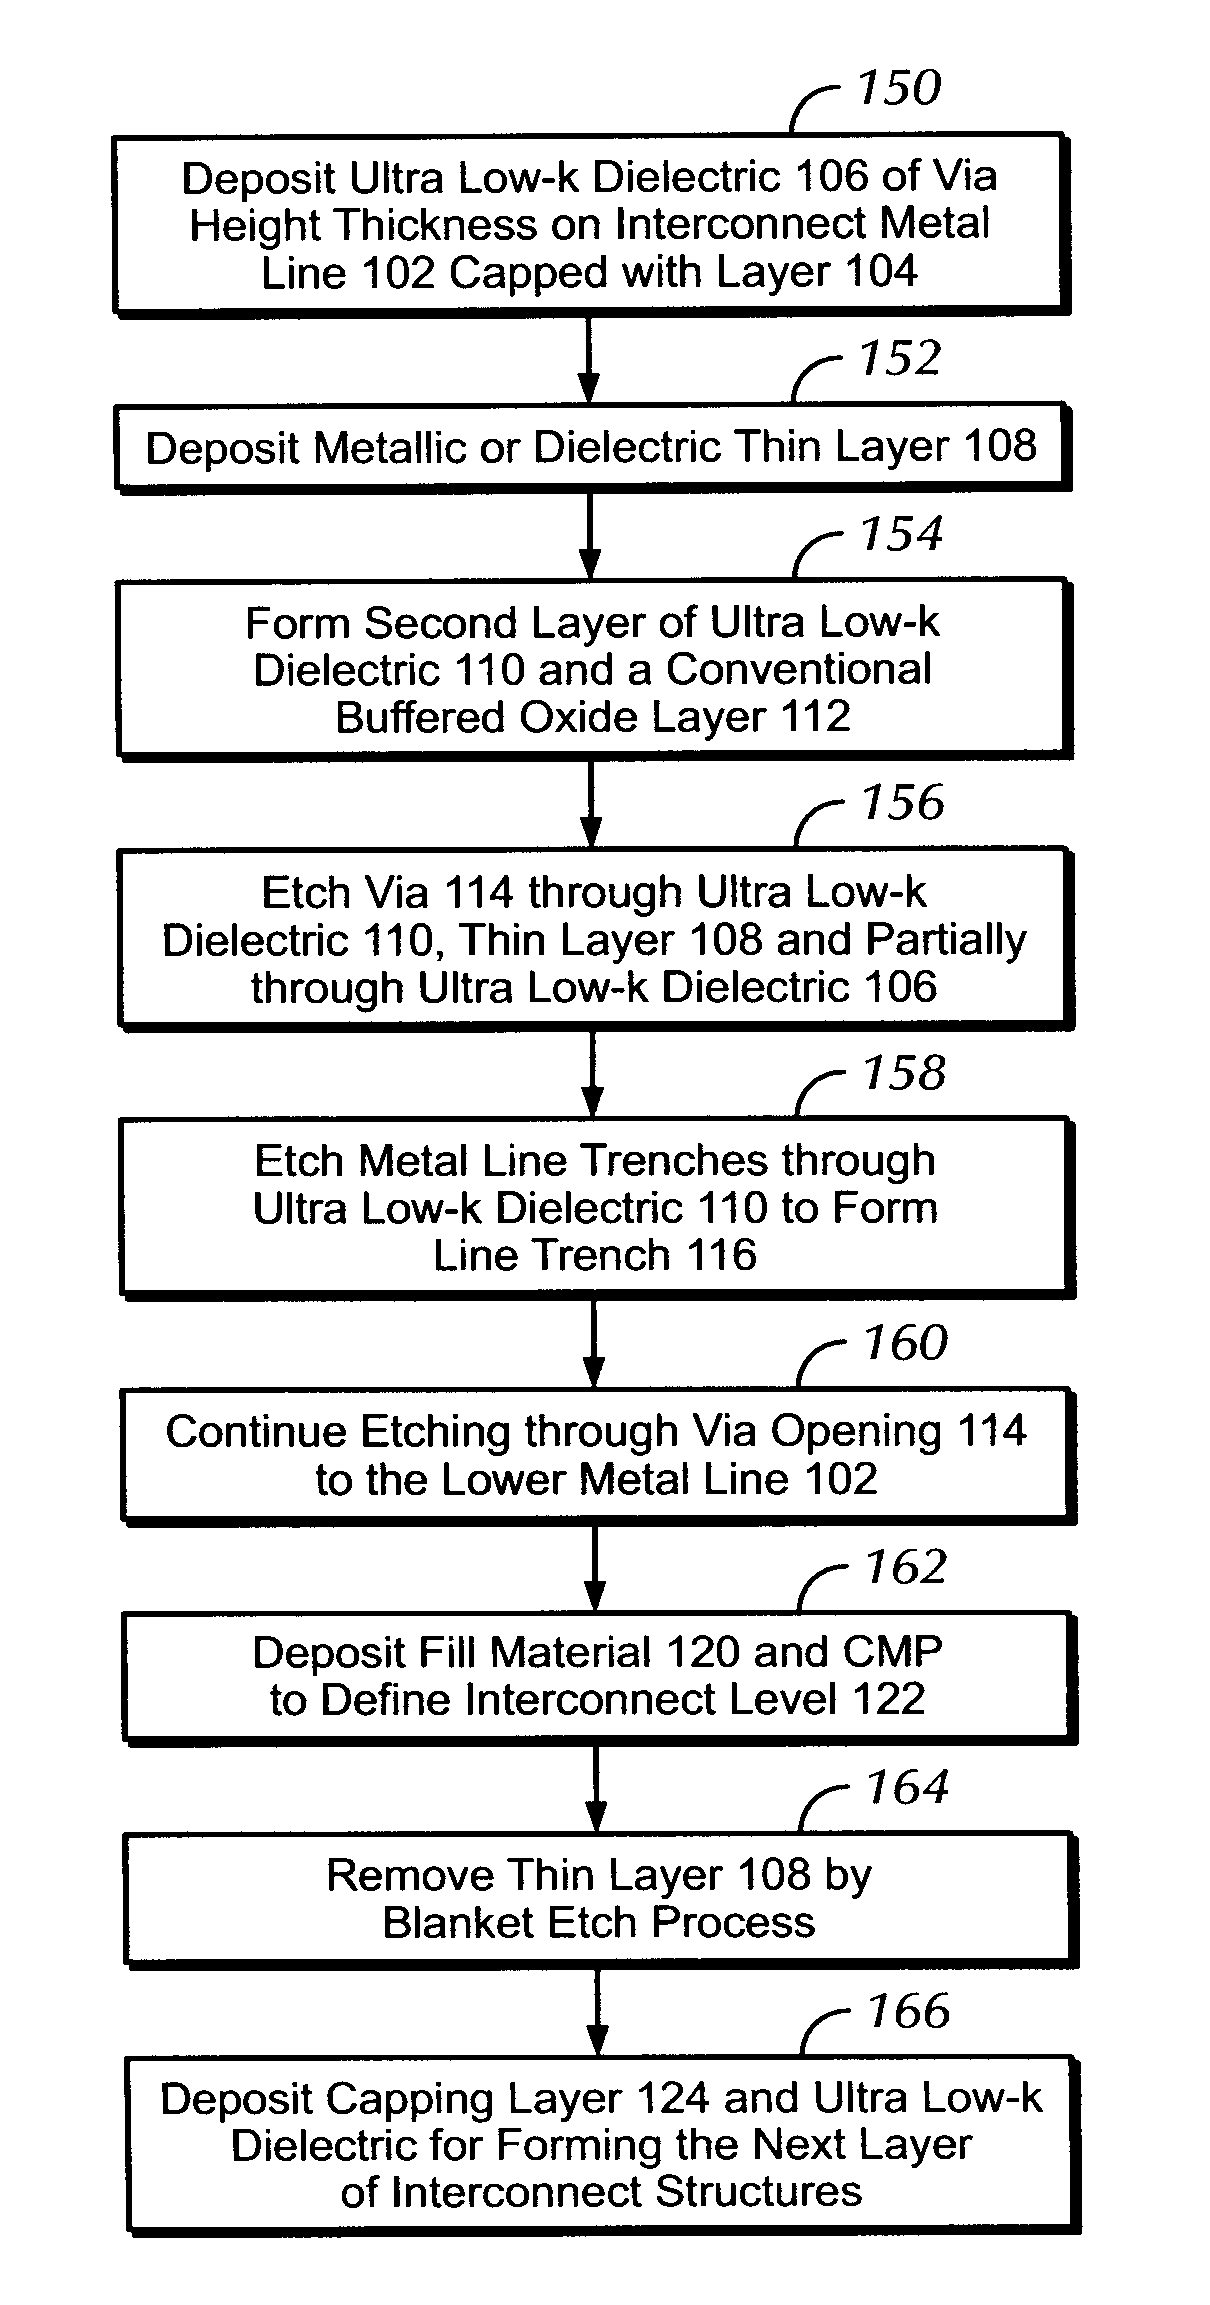 Method of Forming Metal Interconnect Structures in Ultra Low-K Dielectrics